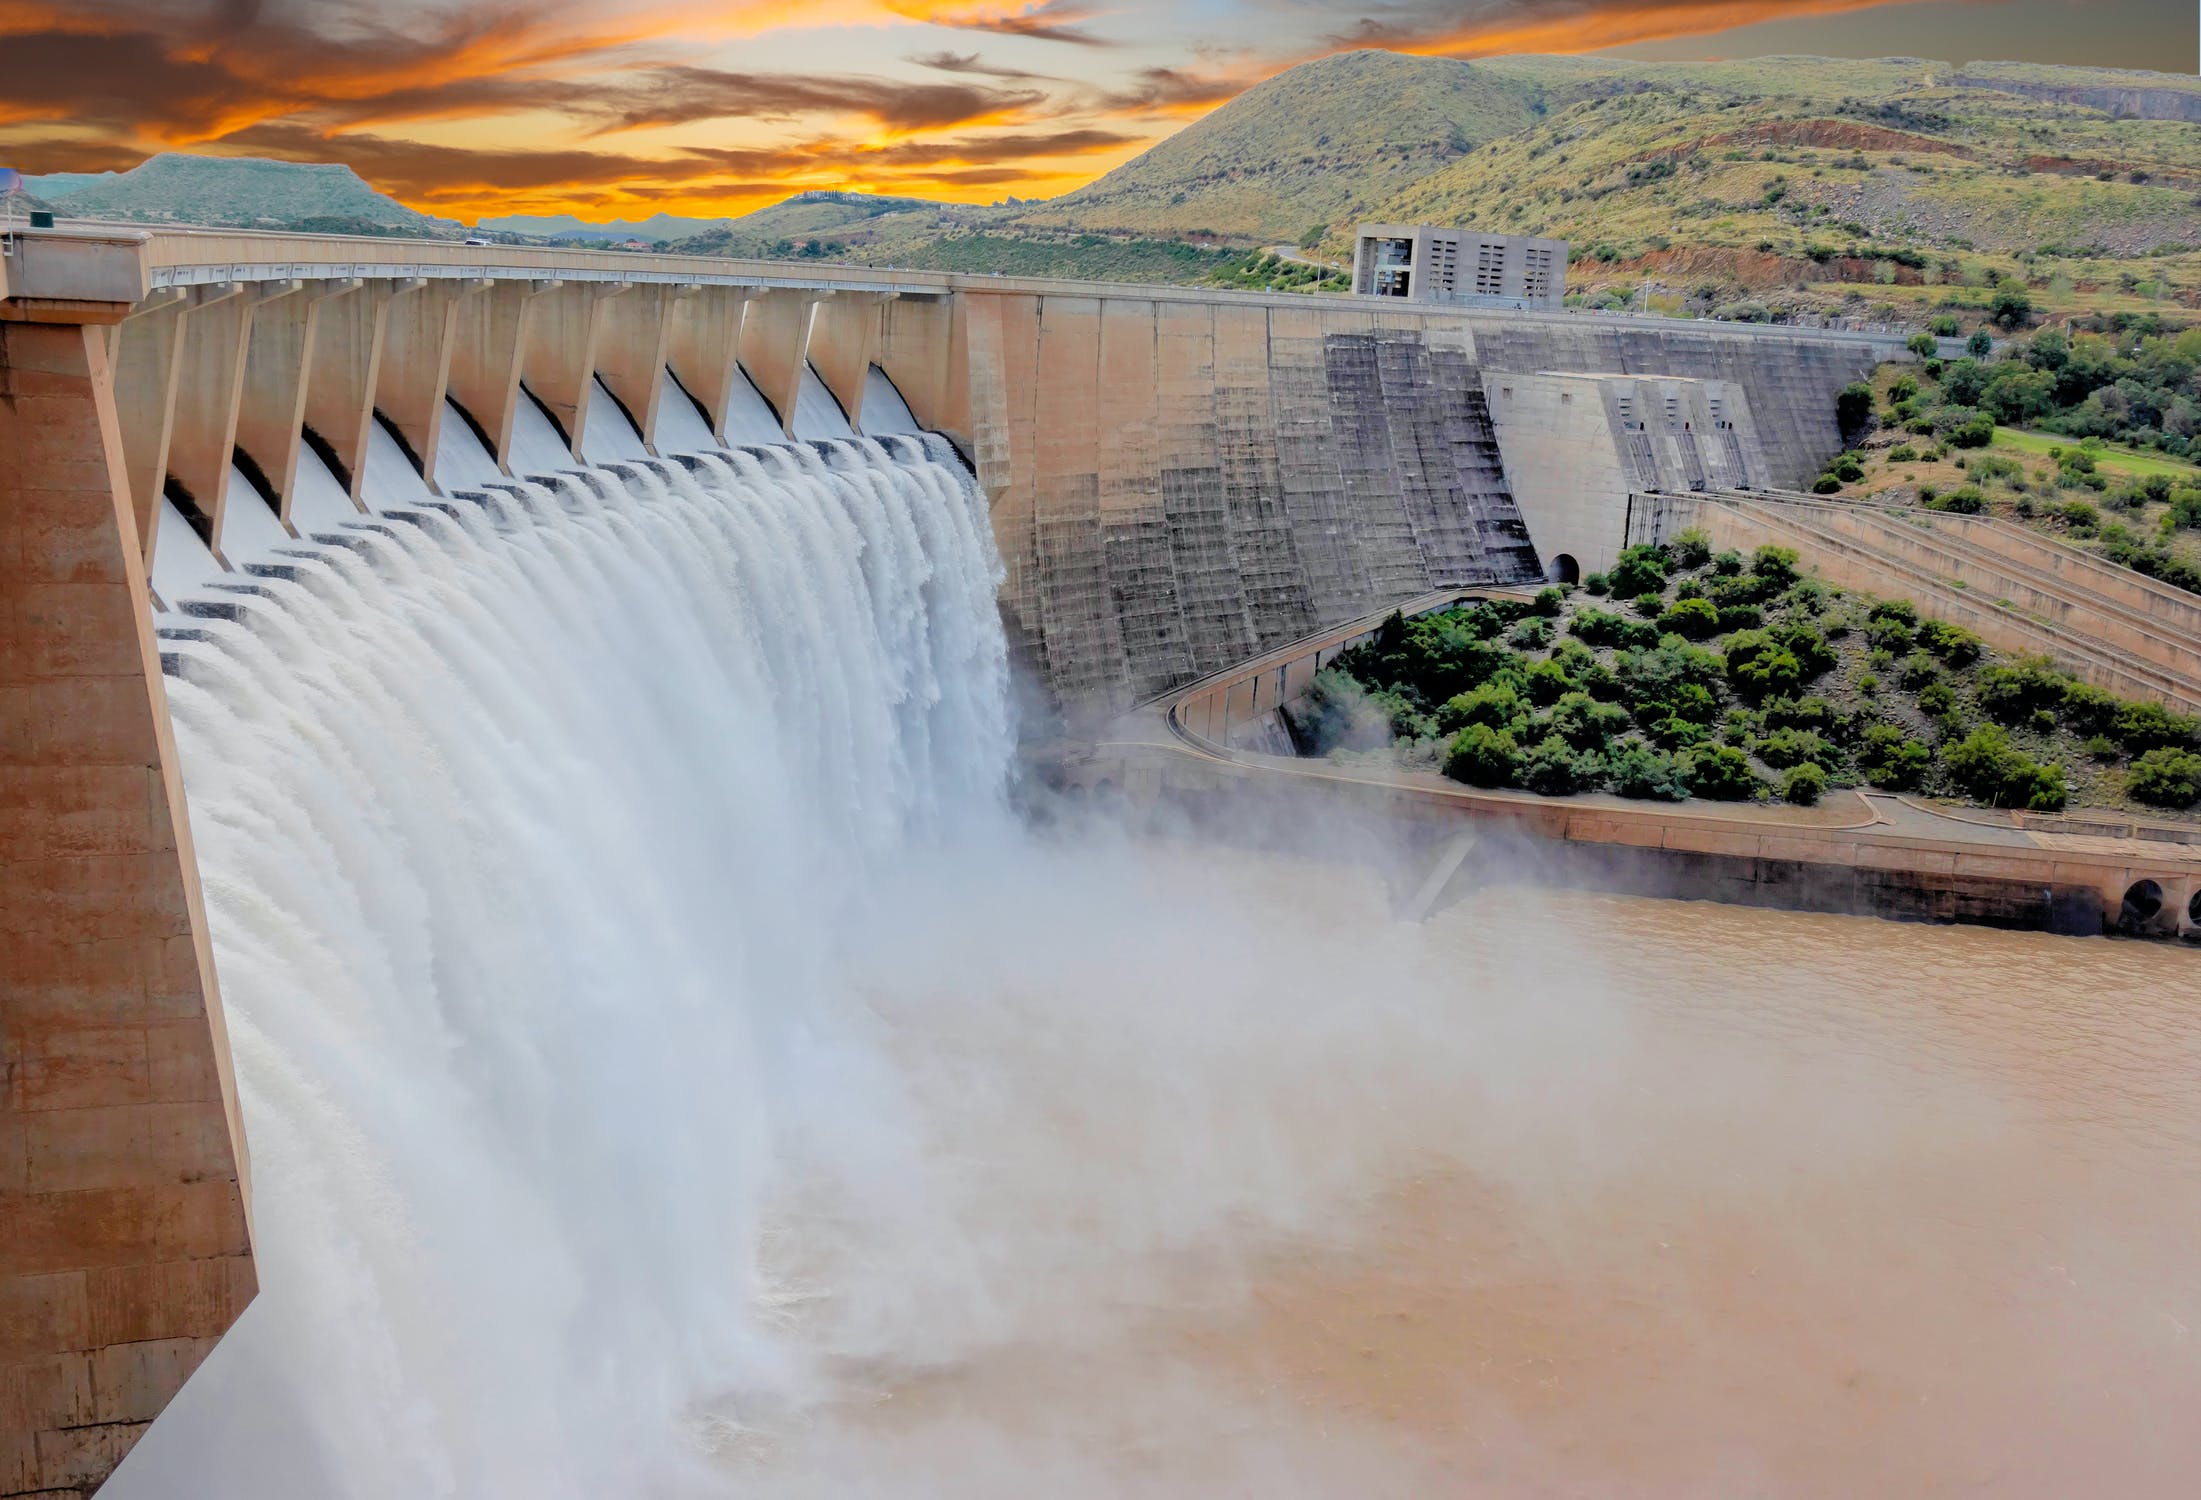 The Dam Removal Problem